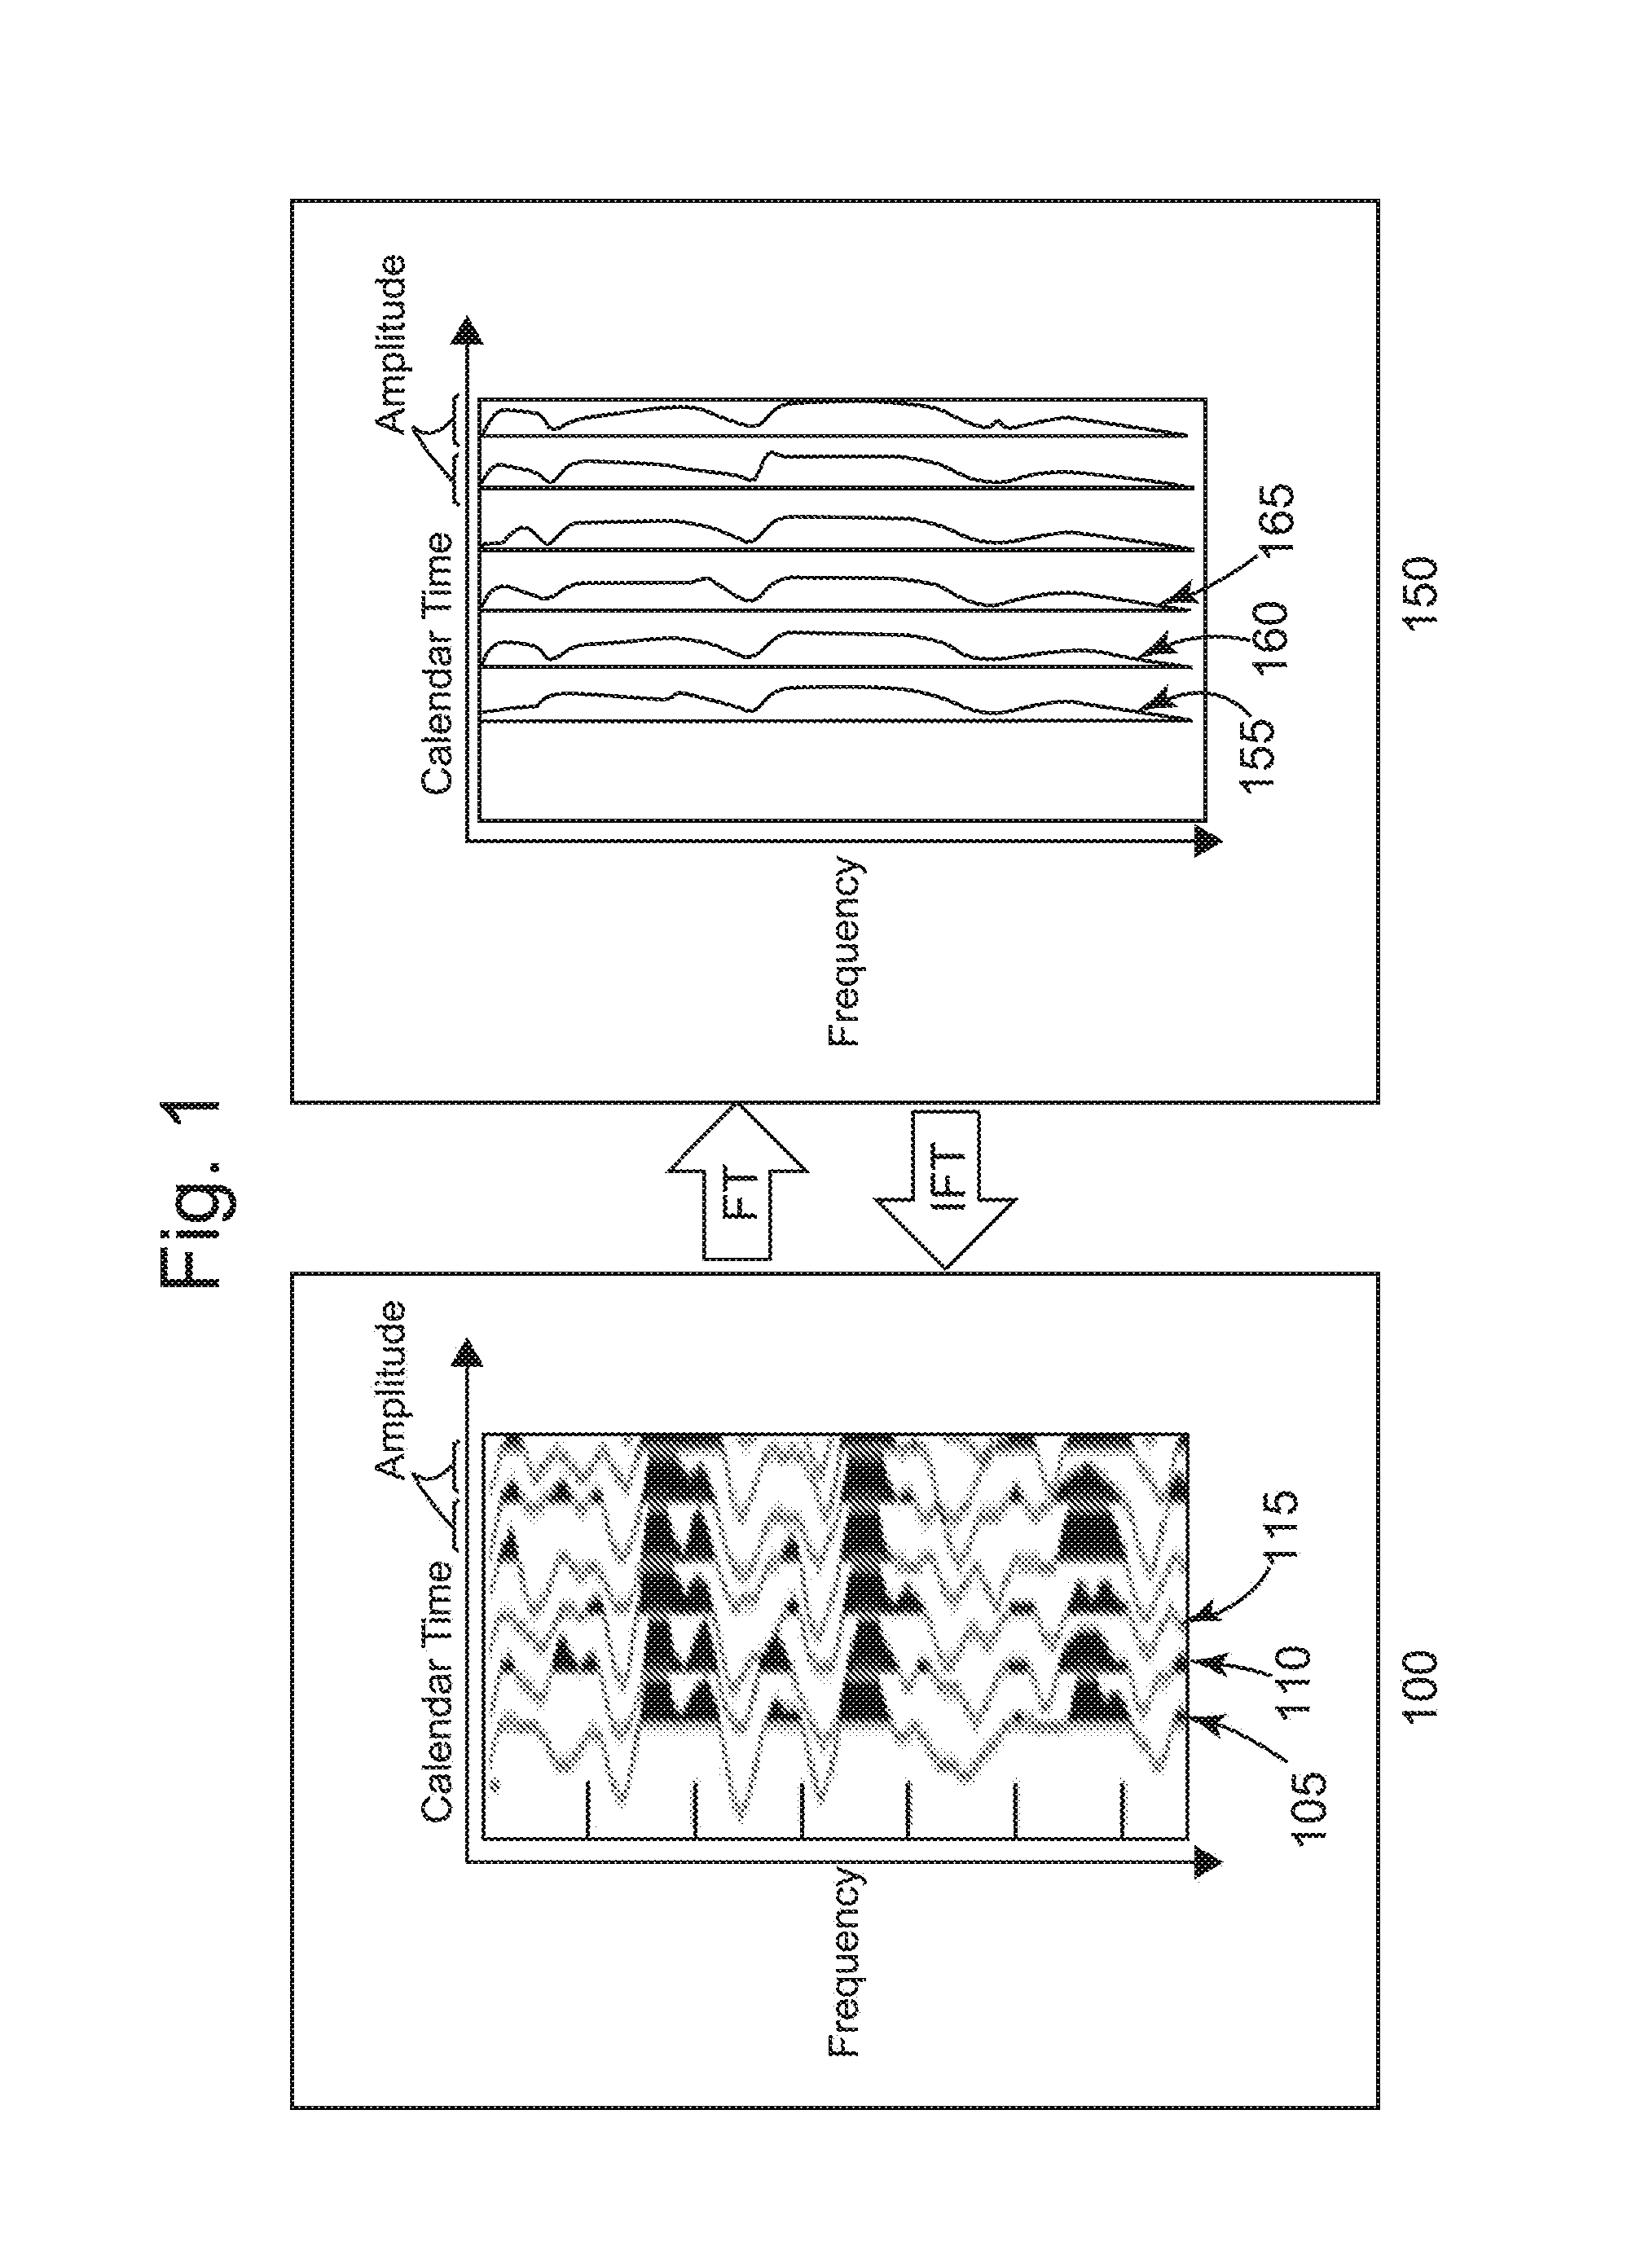 Systems and methods to reduce noise in seismic data using a frequency dependent calendar filter